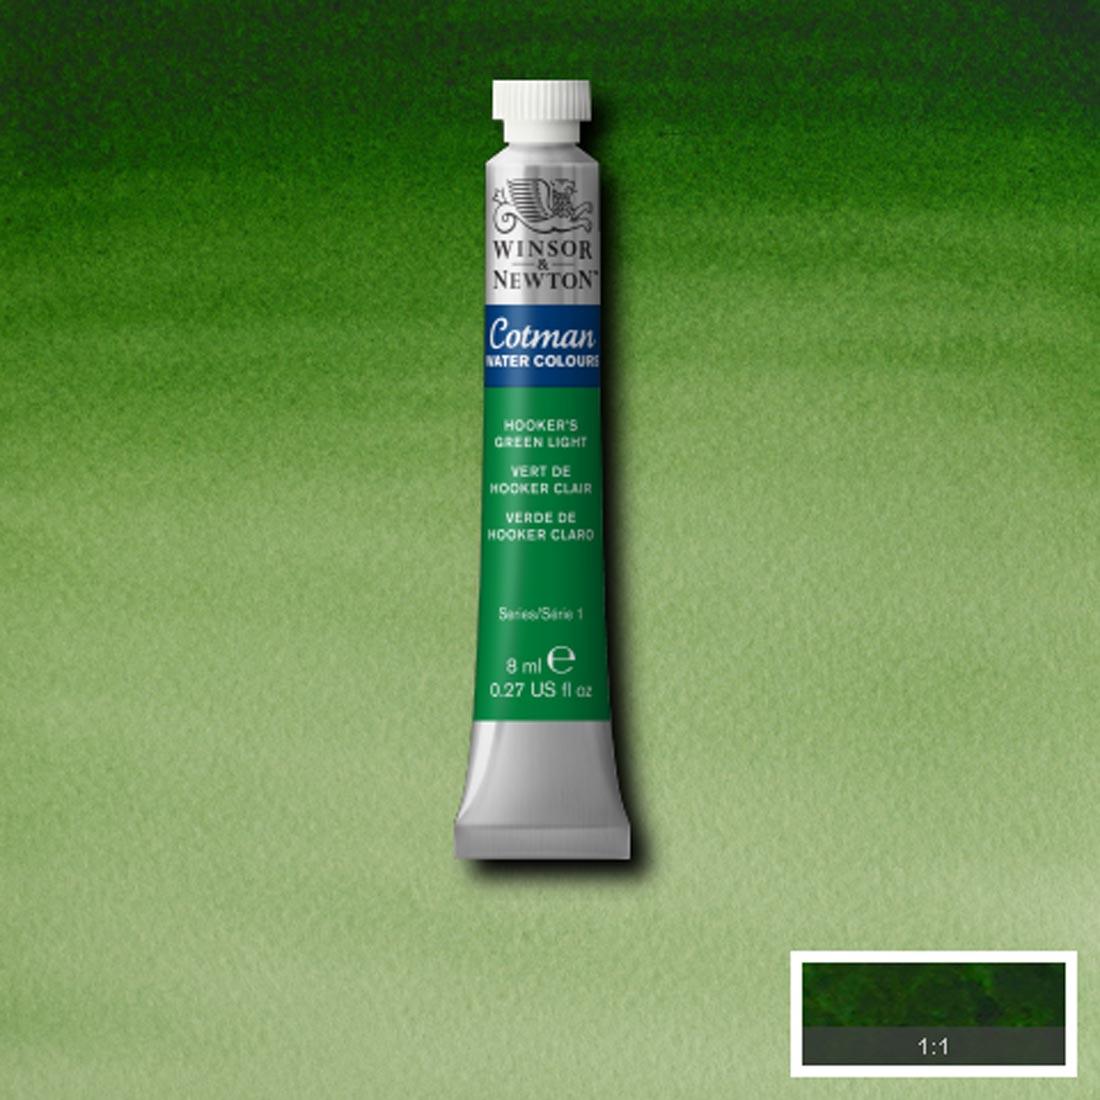 Tube of Hooker's Green Light Winsor and Newton Cotman Water Colour with a paint swatch for the background